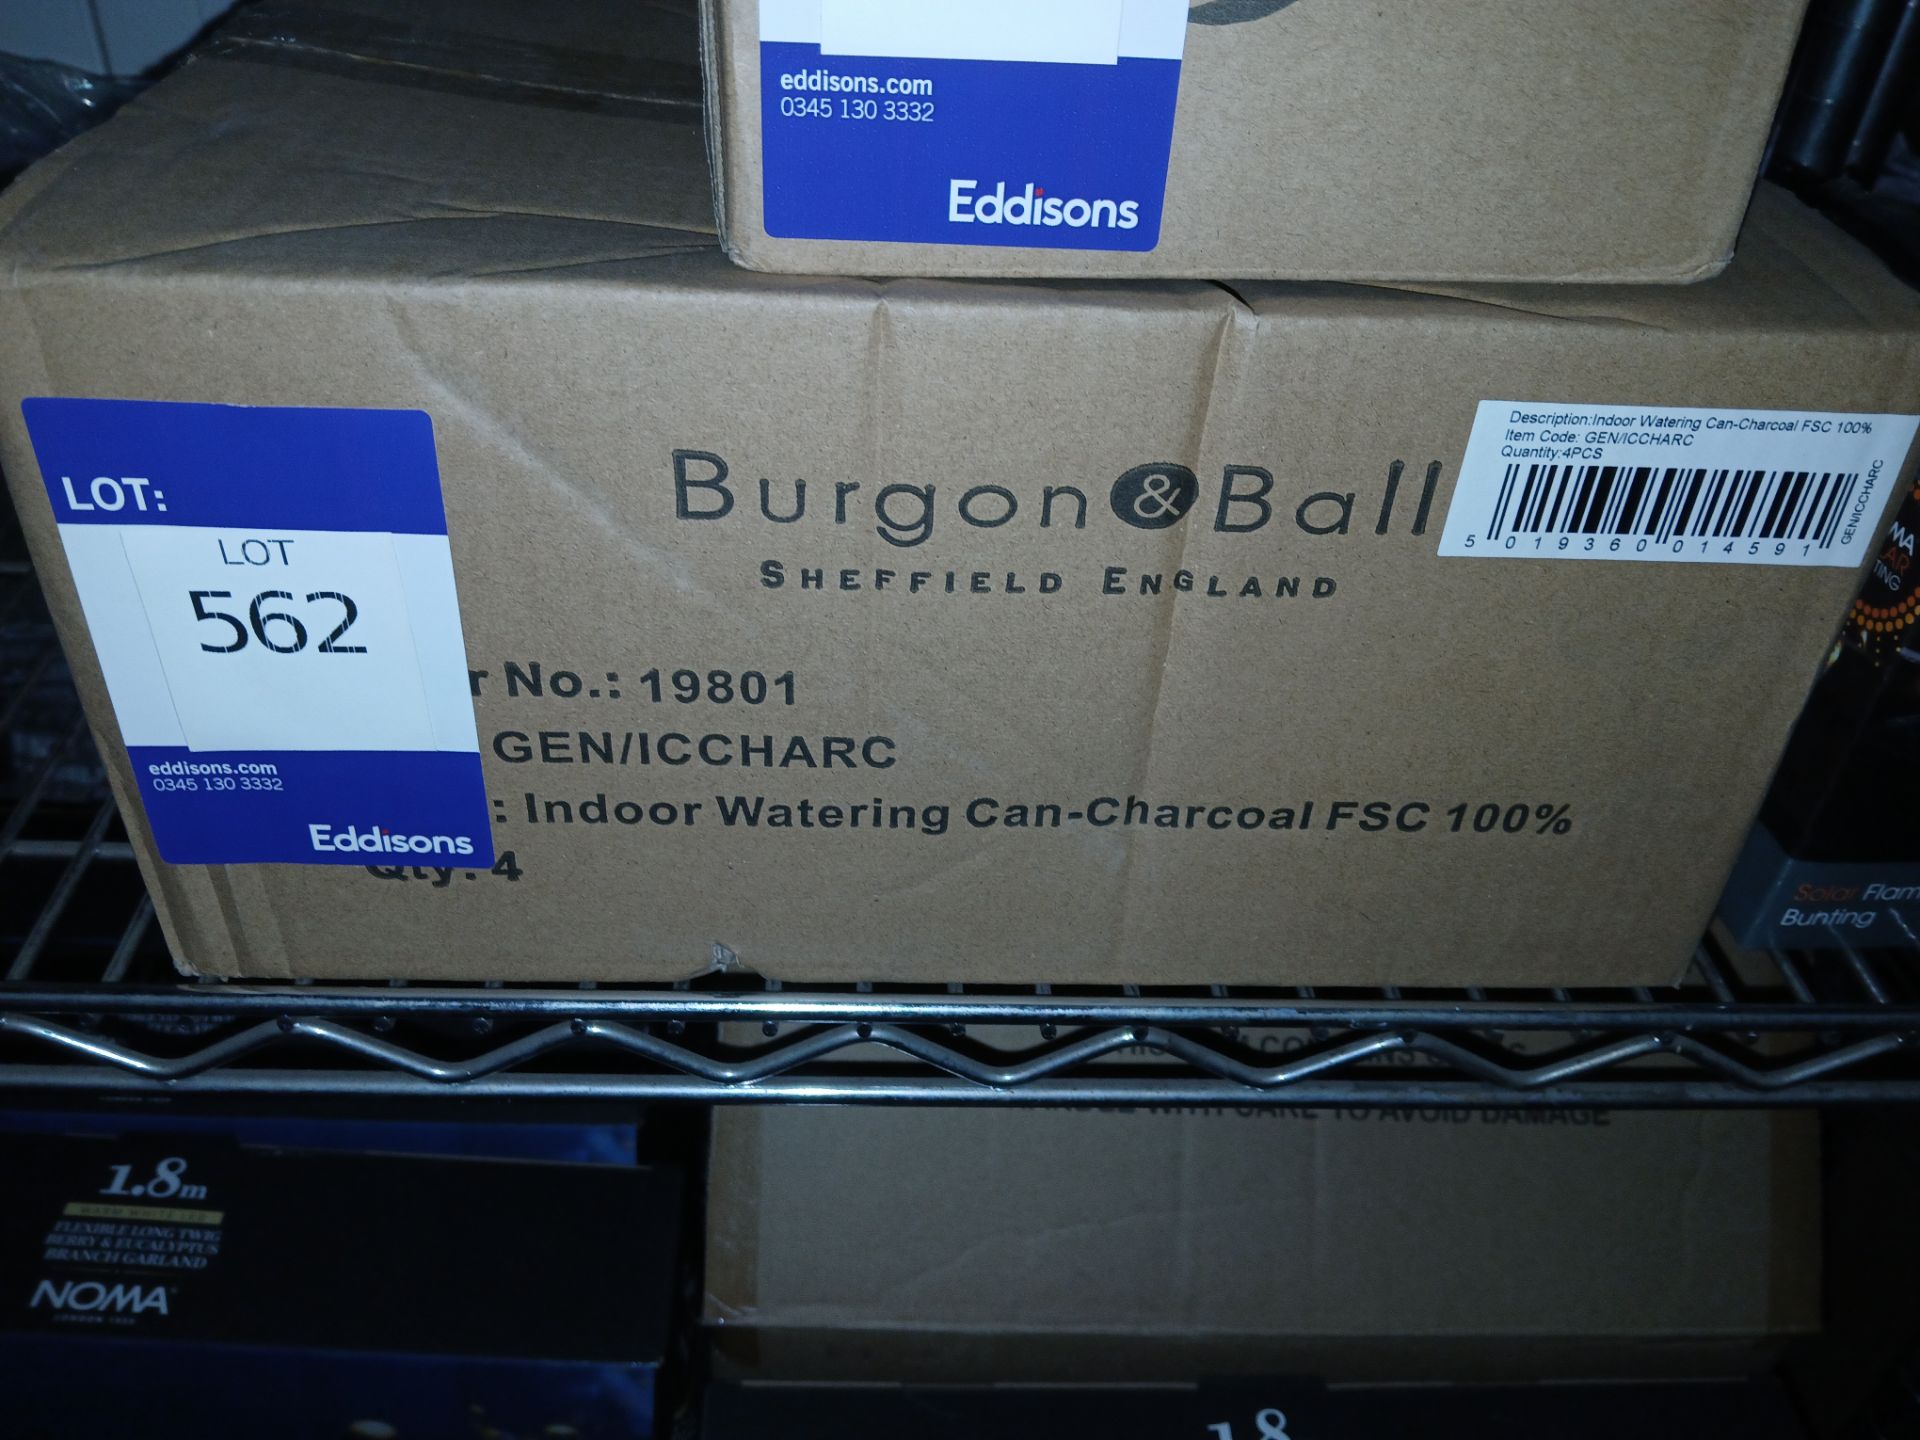 4 x Burgon and Ball Indoor Watering Cans (Please note, Viewing Strongly Recommended - Eddisons